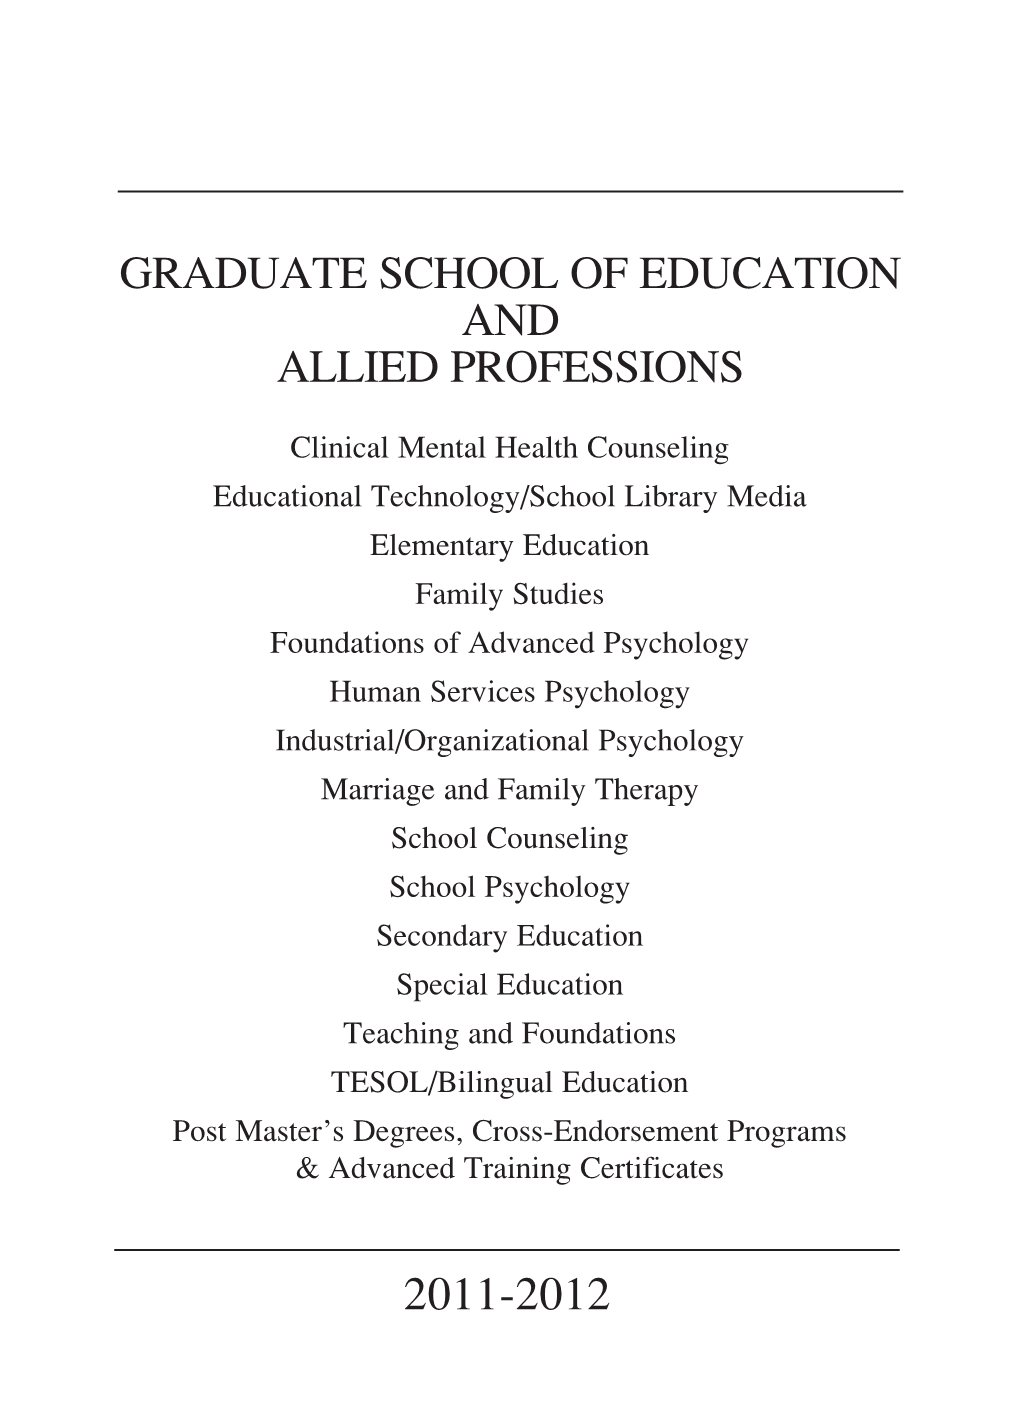 Graduate School of Education and Allied Professions